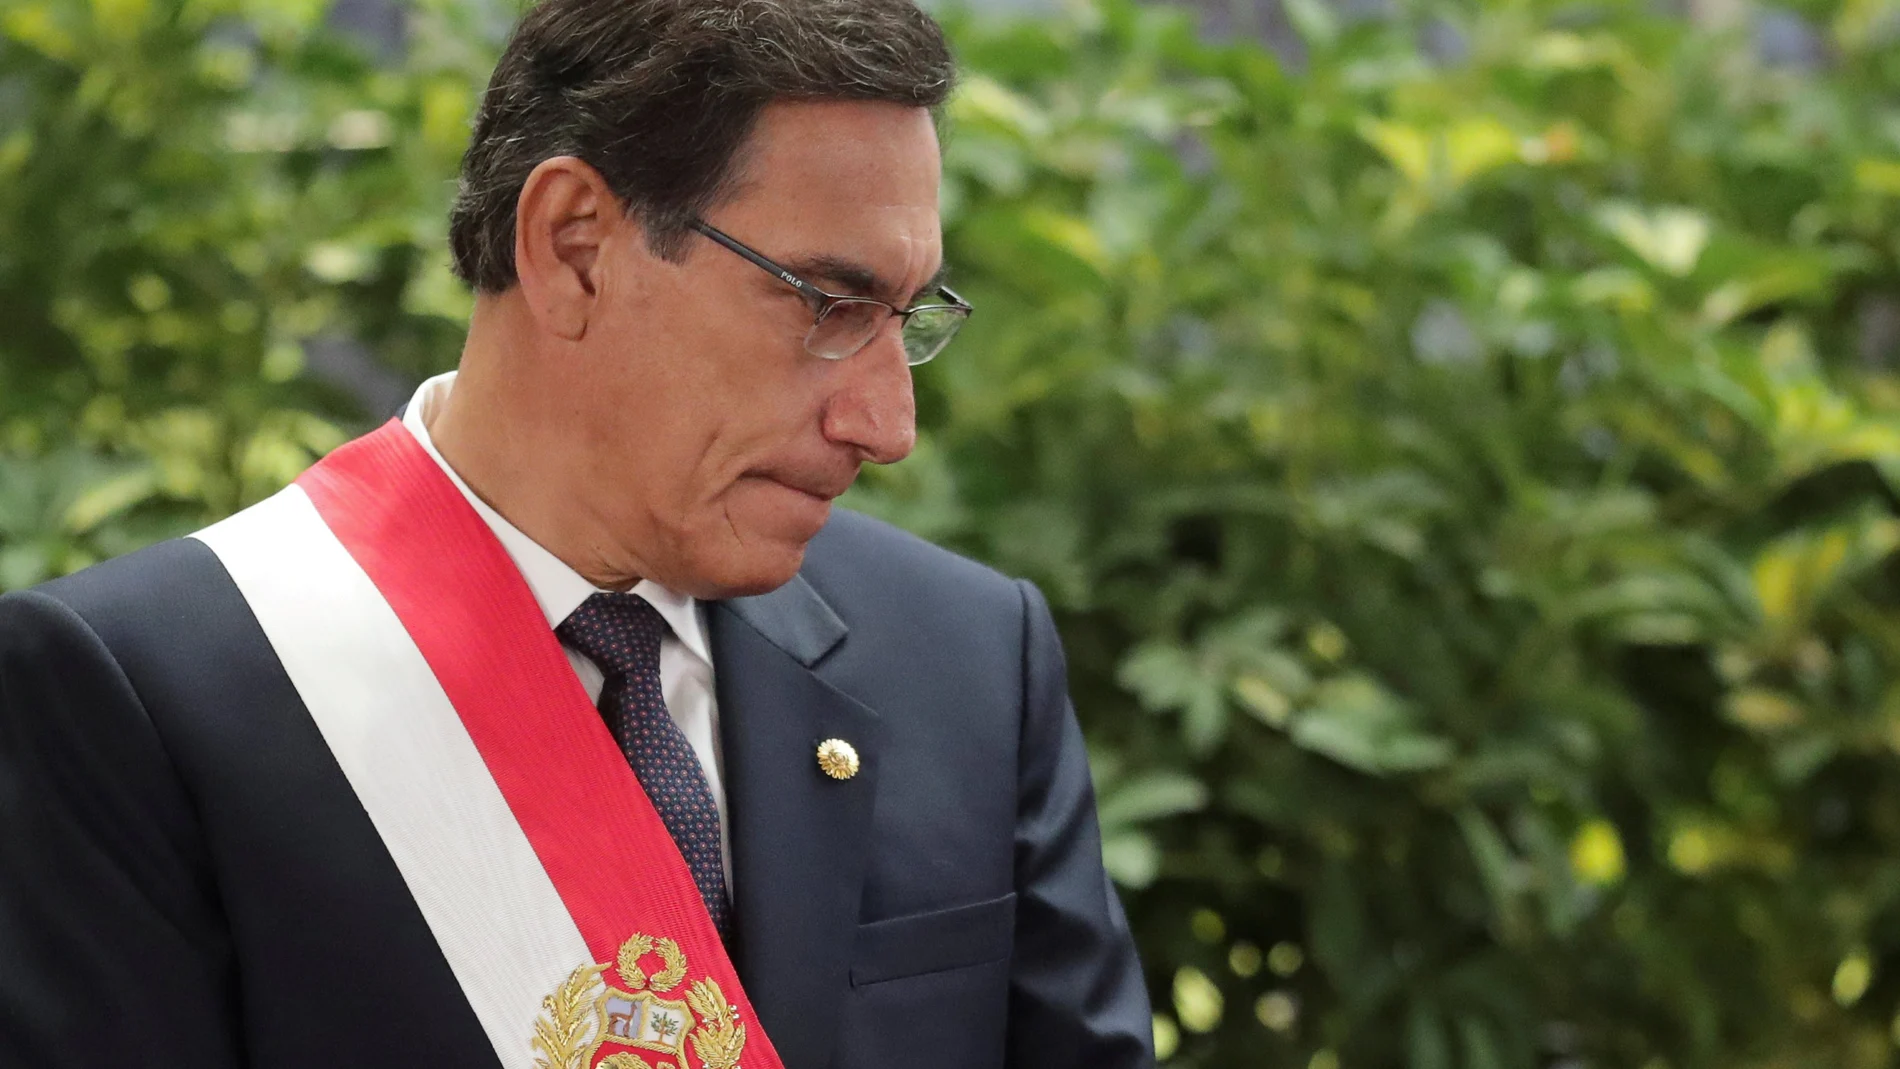 FILE PHOTO: Peru's President Martin Vizcarra attends a swearing-in ceremony at the government palace in Lima